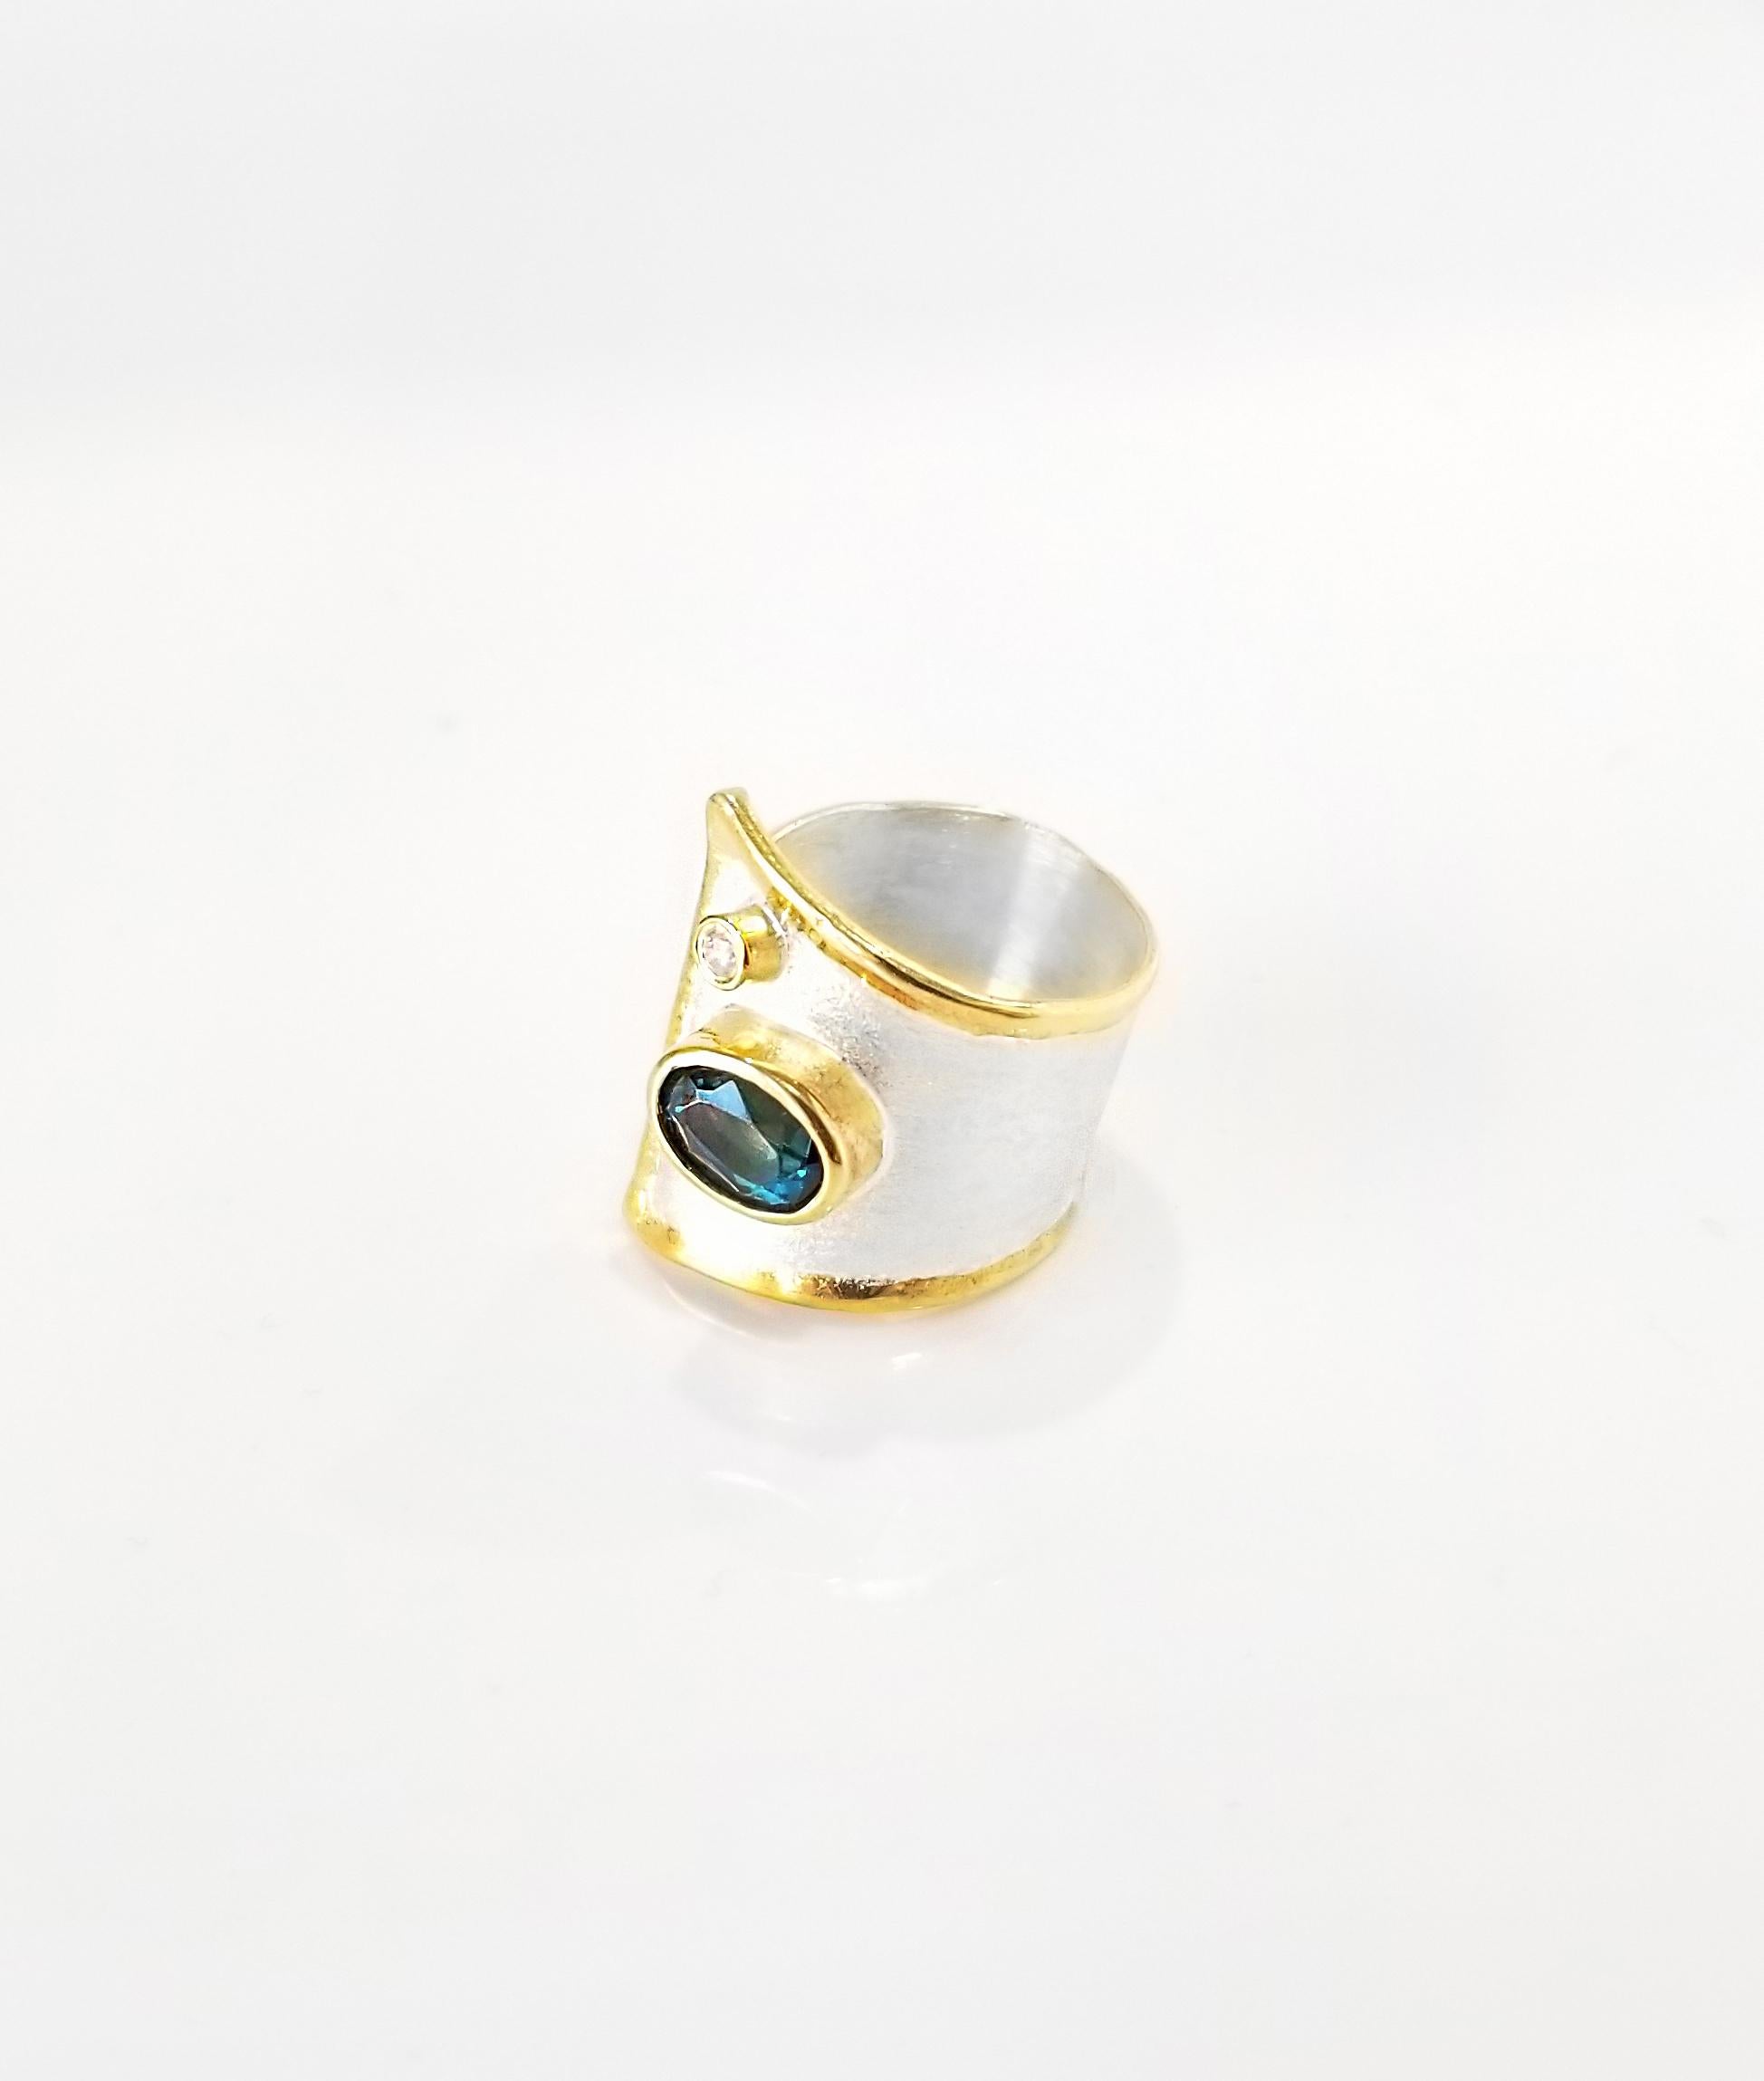 Yianni Creations Midas Collection 100% Handmade Artisan Gorgeous Ring from Fine Silver with an overlay of 24 Karat Yellow Gold features 1.60 Carat London Blue Topaz accompanied by 0.03 Carat Diamond complemented by unique techniques of craftsmanship